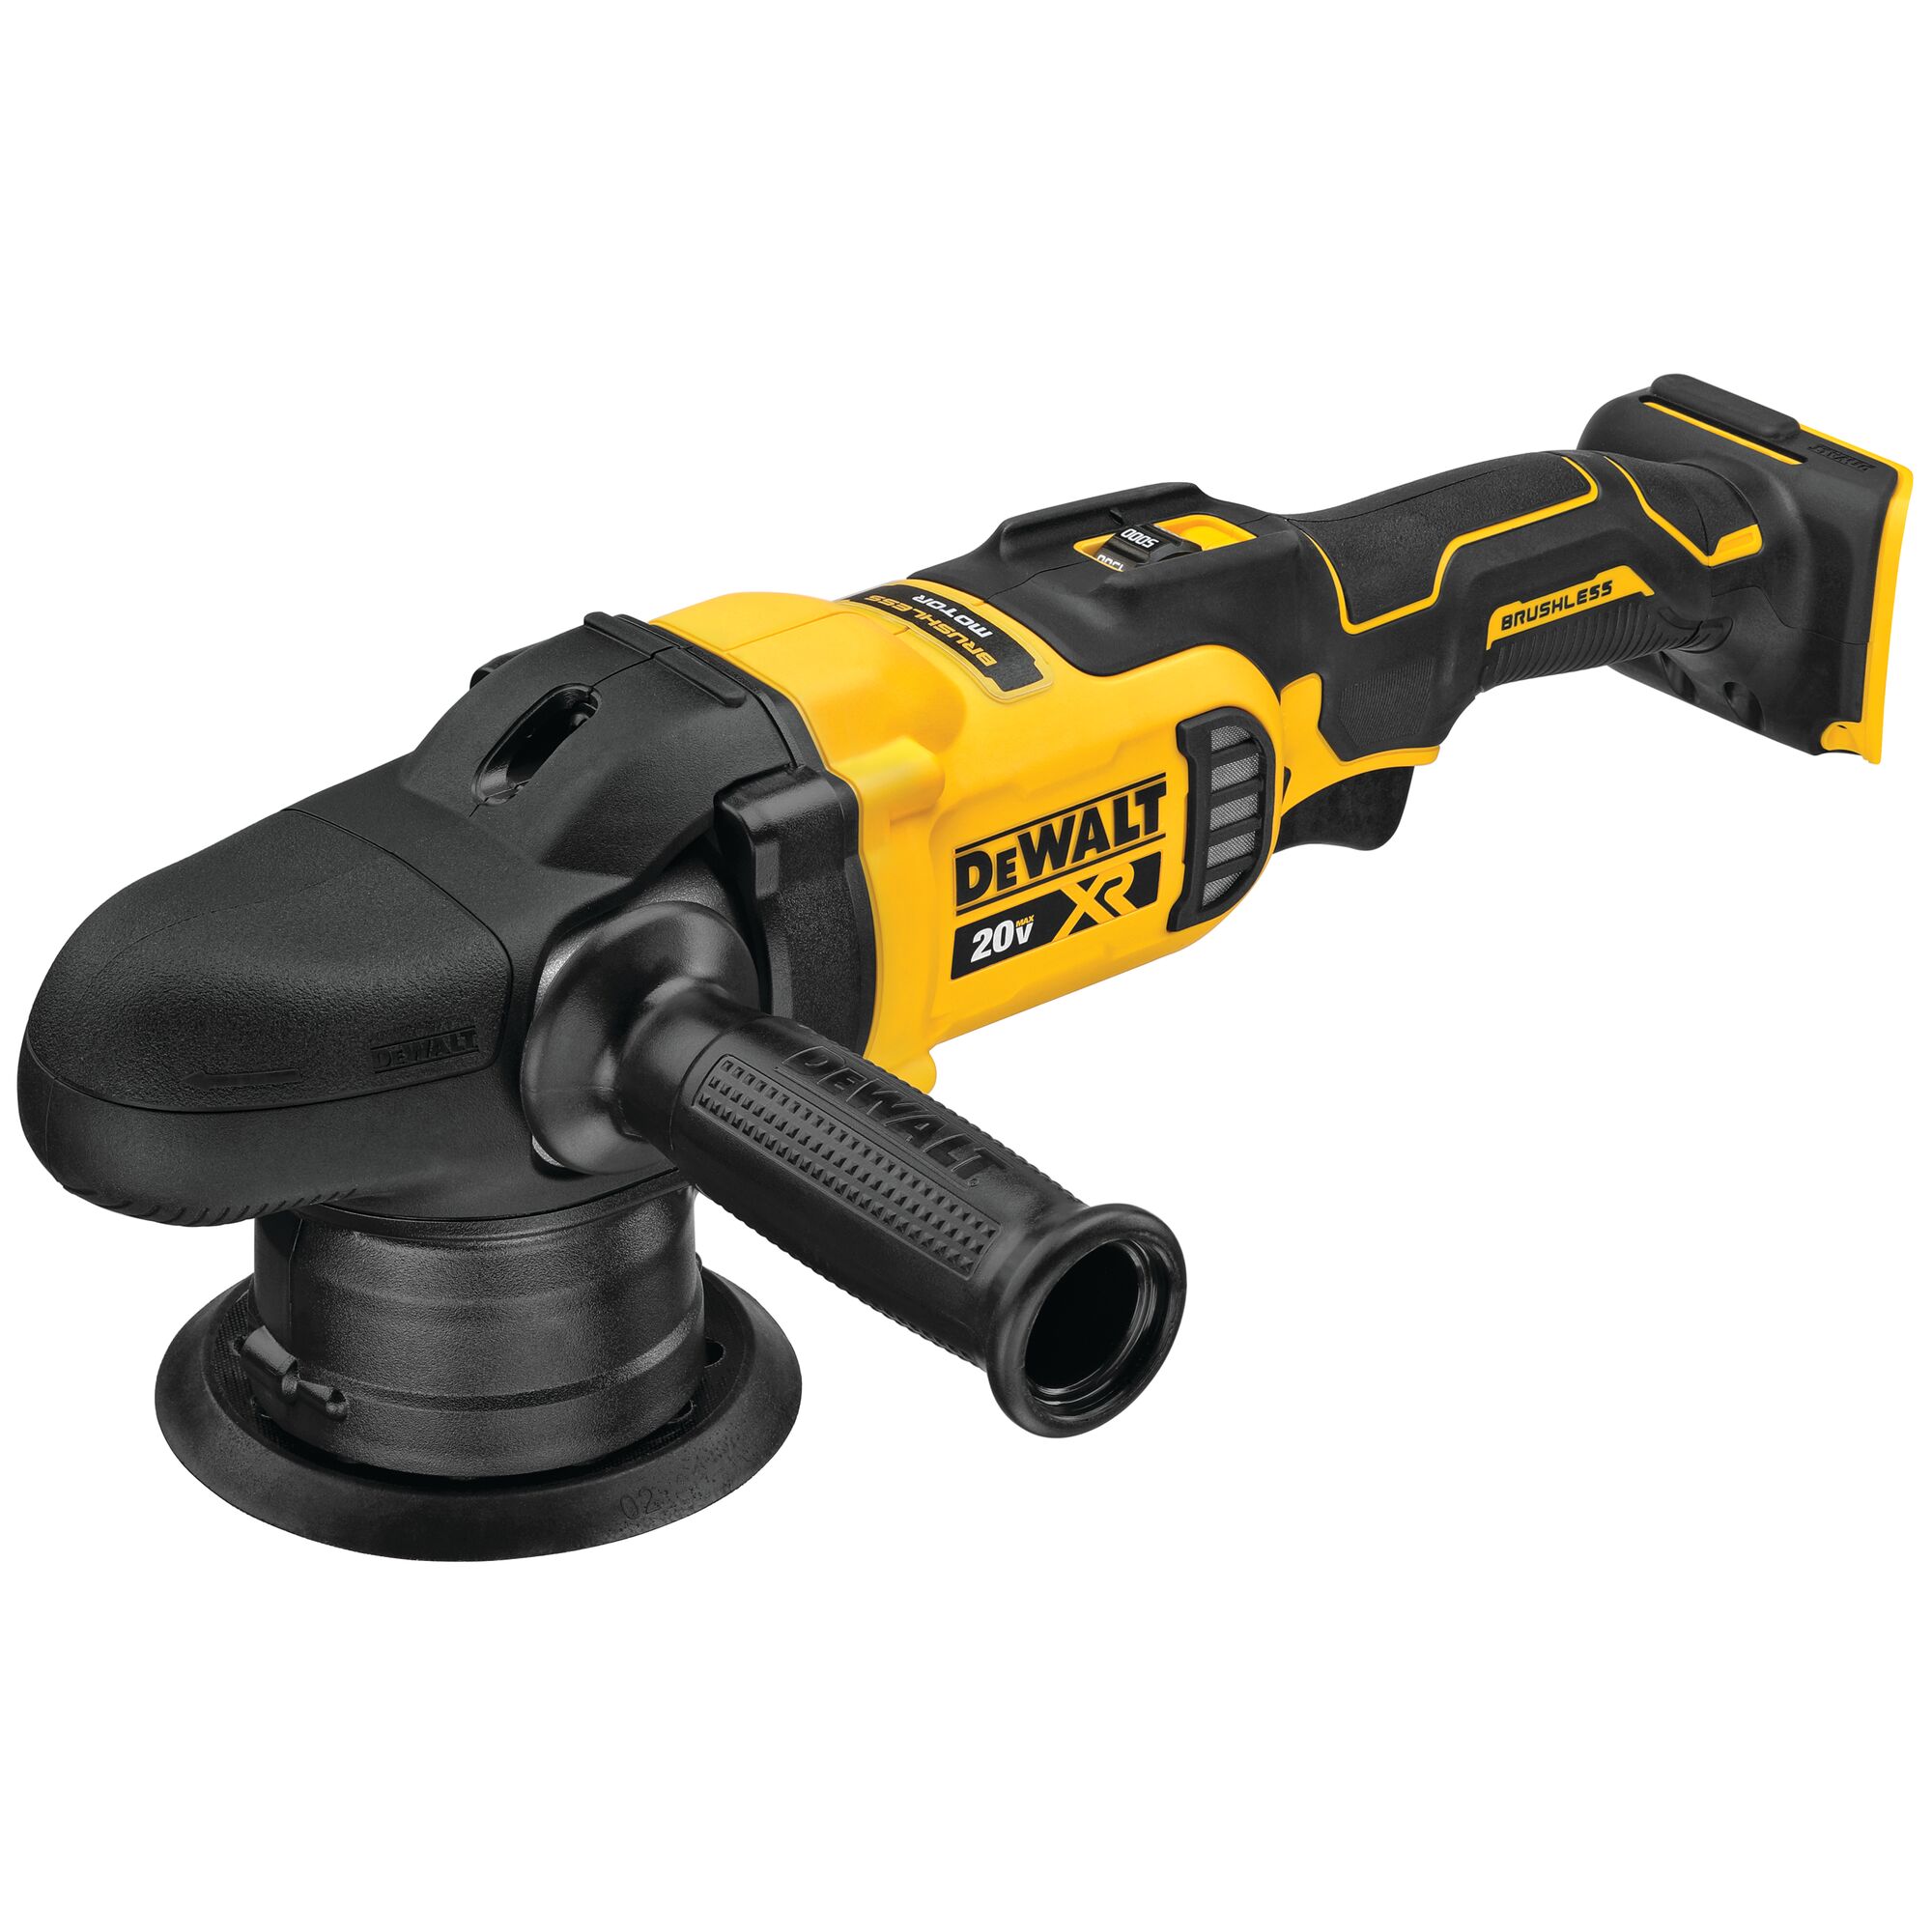 Cordless Buffer Polisher Compatible with DEWALT 20V Max Battery,  5000-10000RPM Variable Speed Brushless Motor Car Buffer, Lightweight,  Rotary Polisher